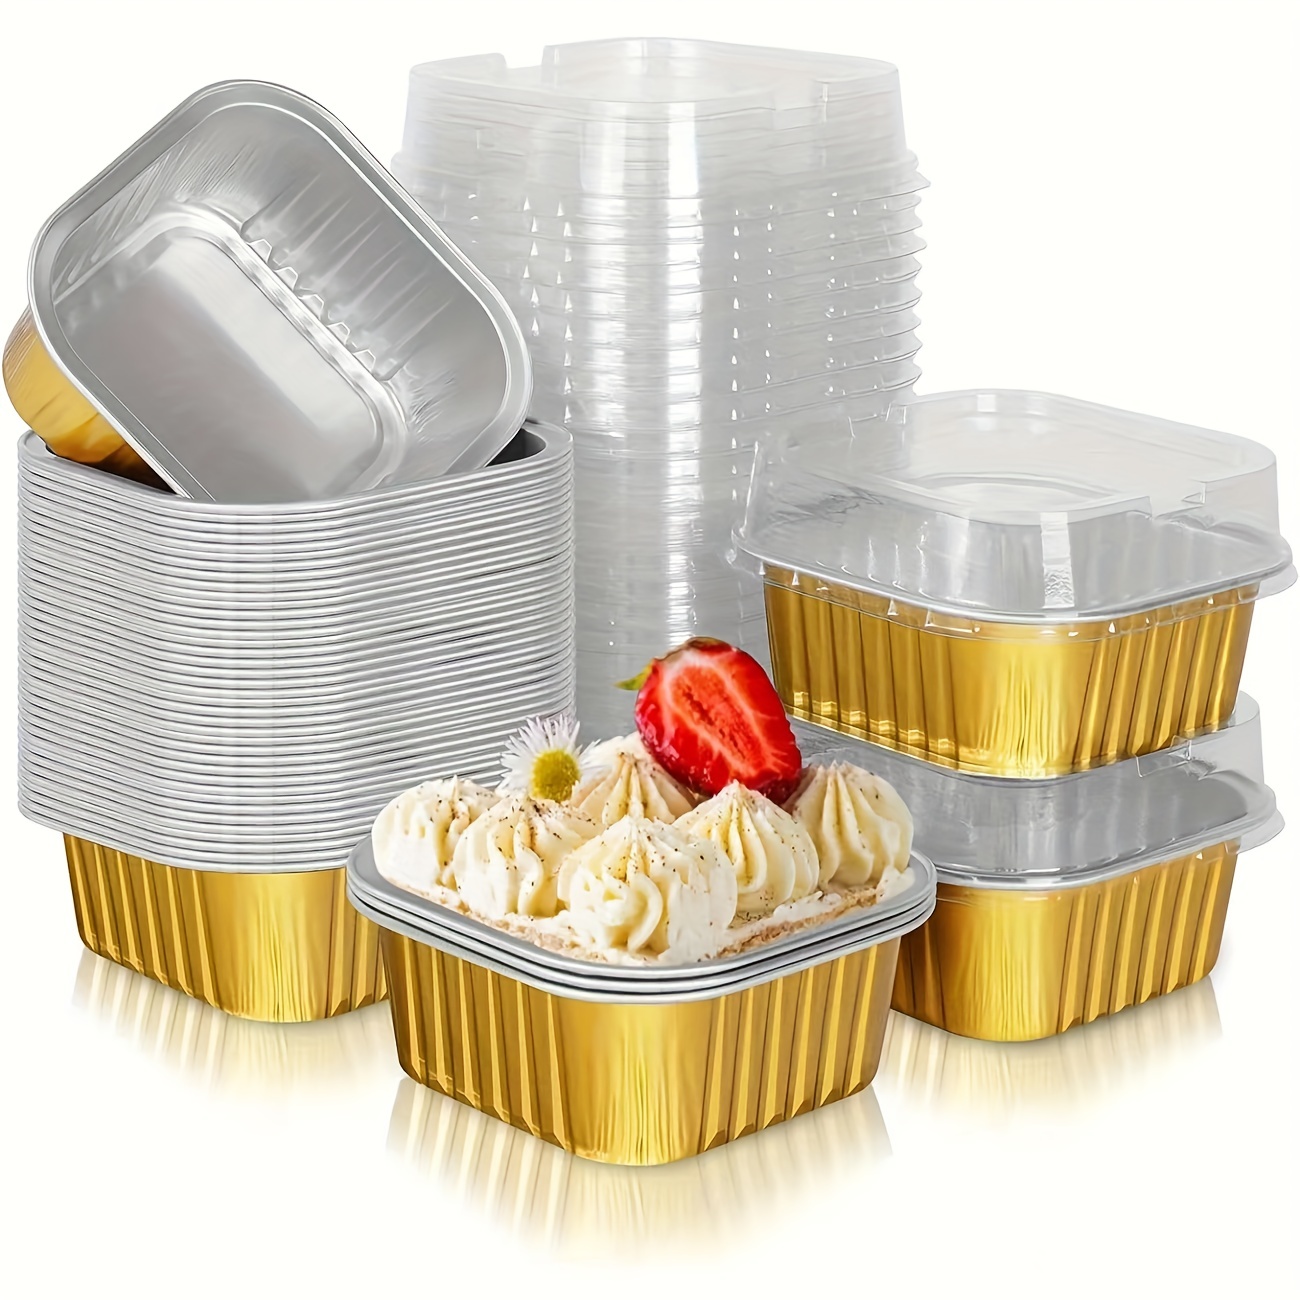 50pcs Foil Cupcake Liners with Lids Round Aluminum Muffin Cake Holders Pans  Baking Cups Tray 5.5oz Heat Resistant Cake Cups 2023 - AliExpress